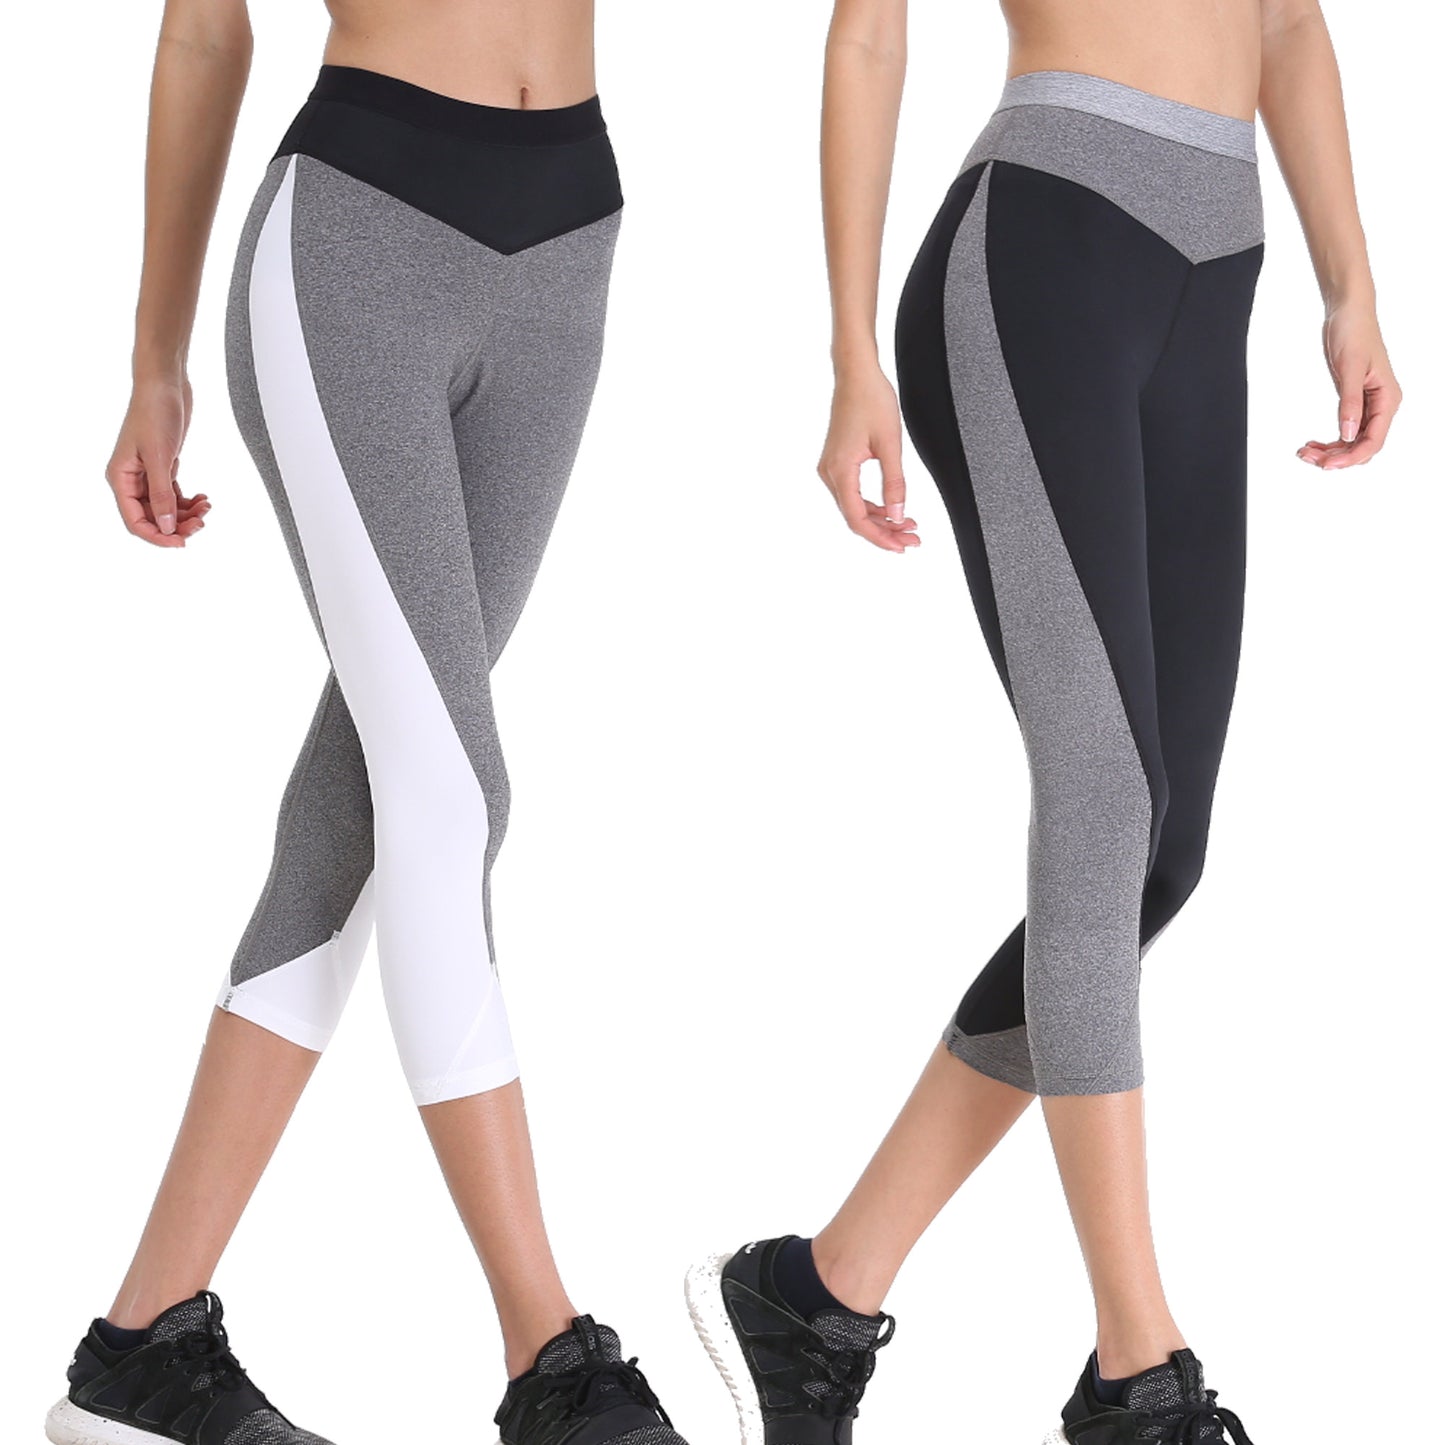 Sports Cropped Yoga Pants for women-Slim Workout Fitness Wear-2 Pack-GRAY, WHITE